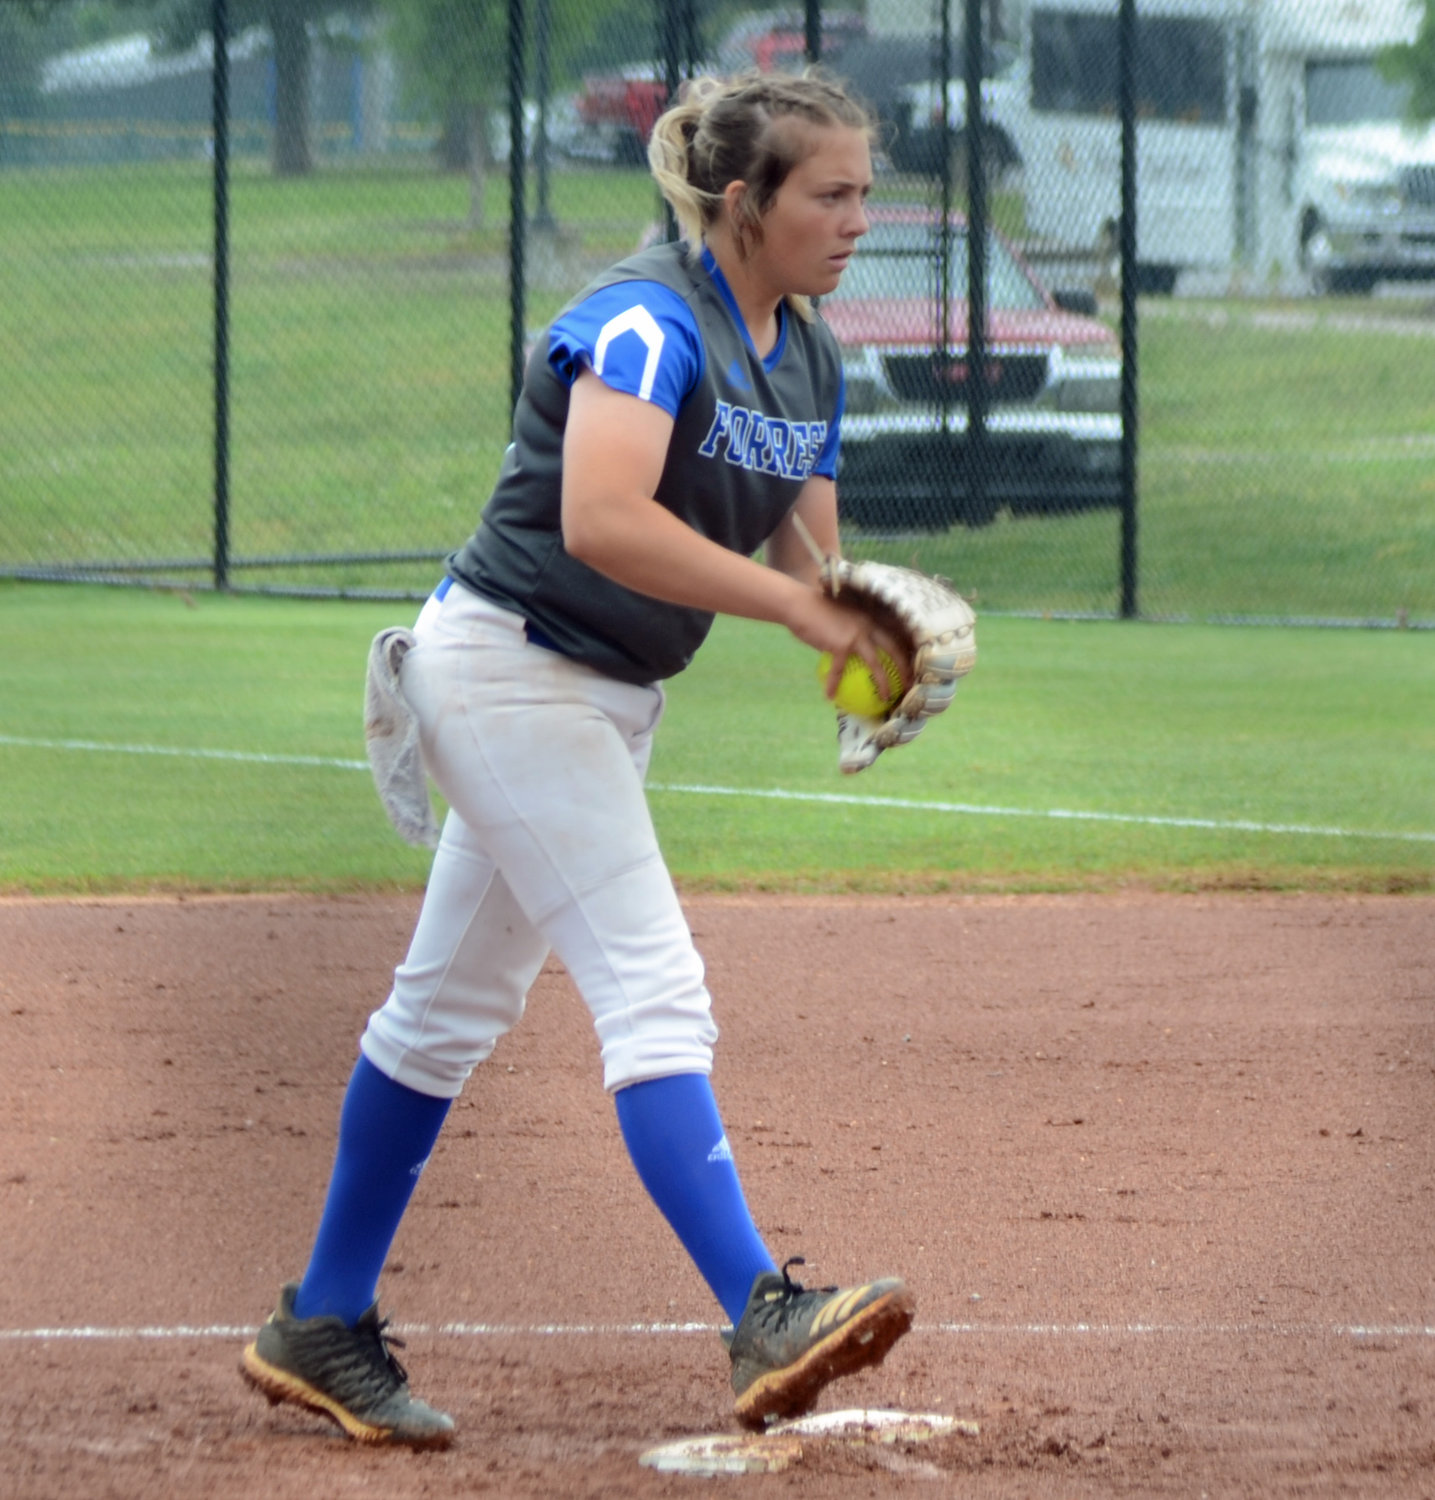 Julie Williams came back in a big way in Wednesday’s winner bracket contest versus Adamsville as the junior picked up a three-hit, complete game win in the circle.